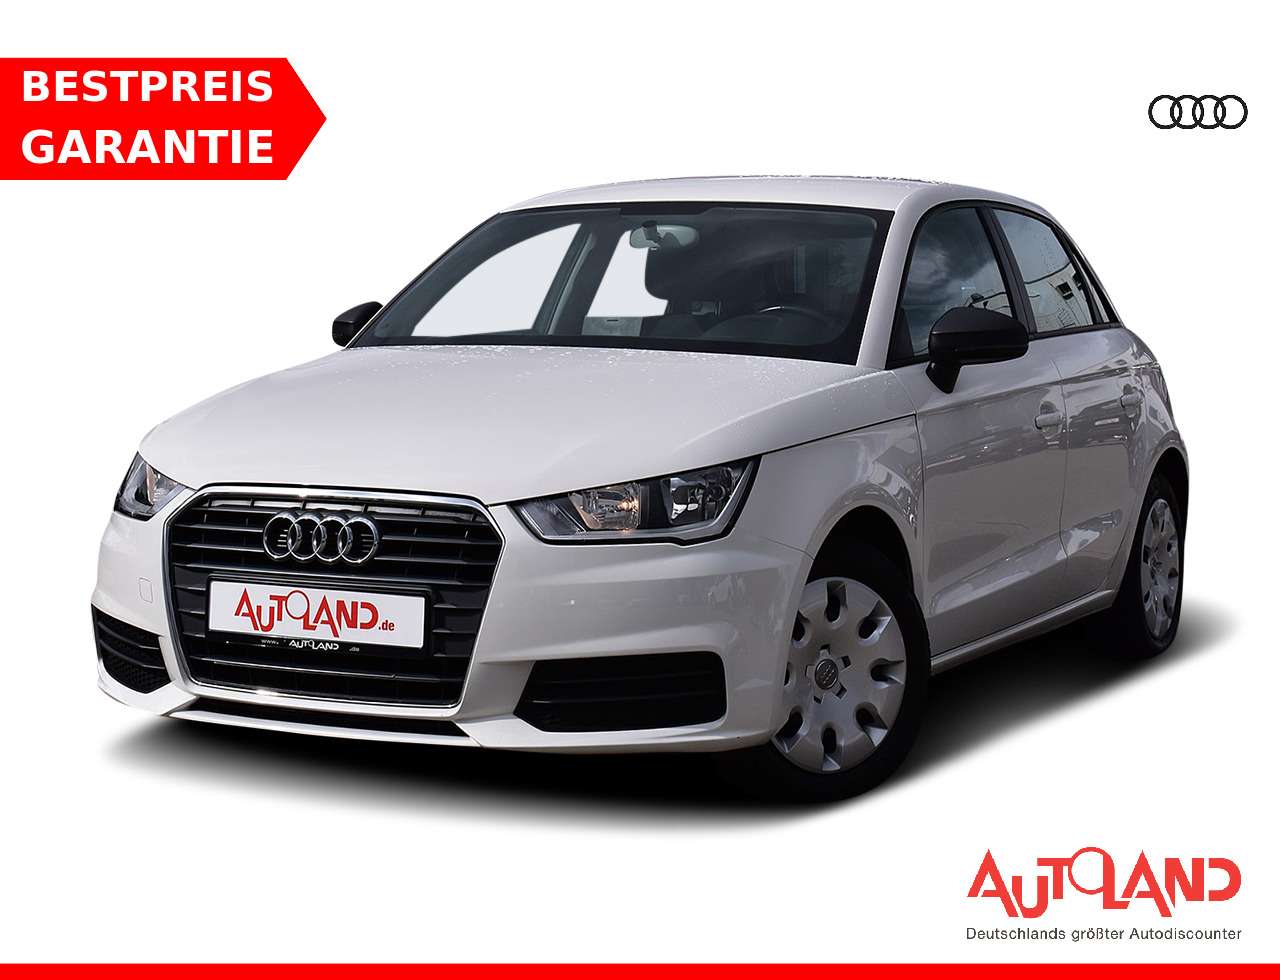 Audi A1 Compact in White used in Meißen for € 15,900.-